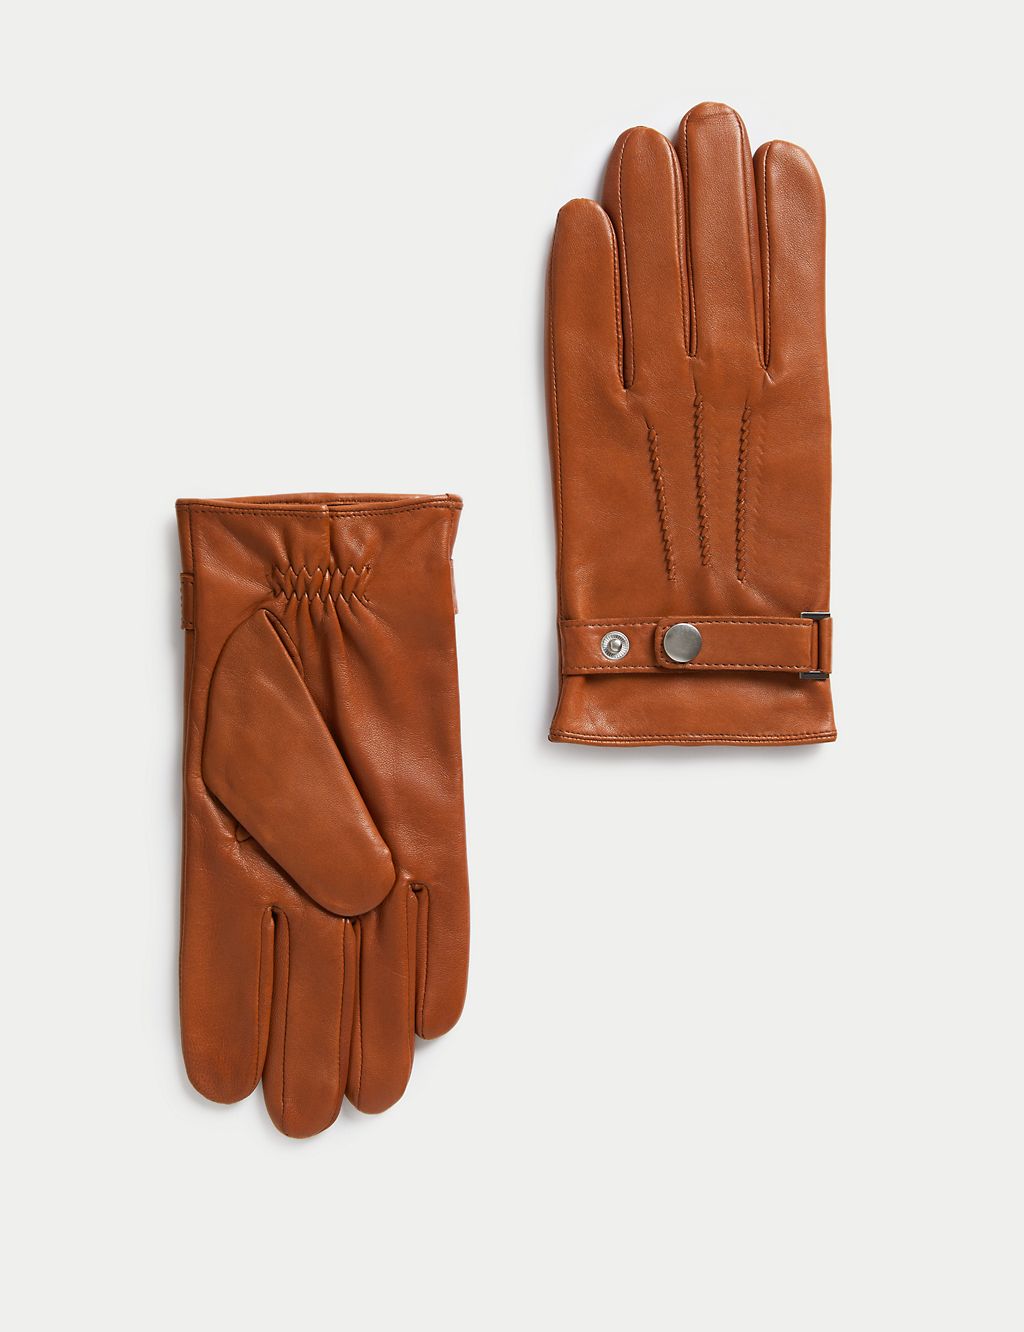 Leather Gloves 1 of 1